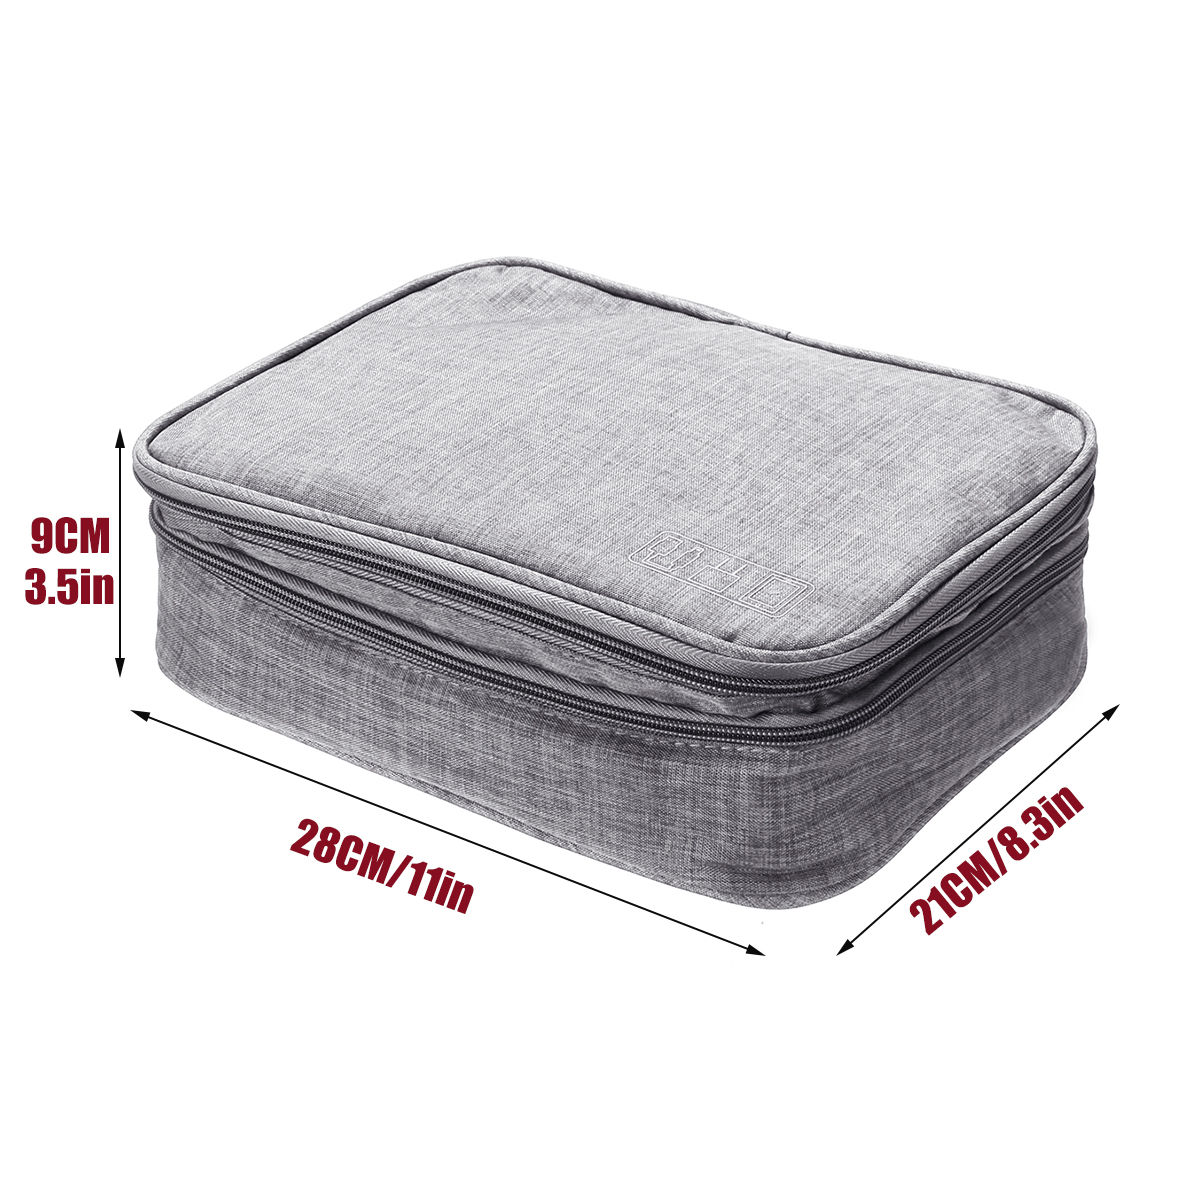 Data-Cable-Storage-Bag-Multifunctional-Digital-Devices-Stationery-Case-Portable-Travel-Electronic-Po-1782315-3